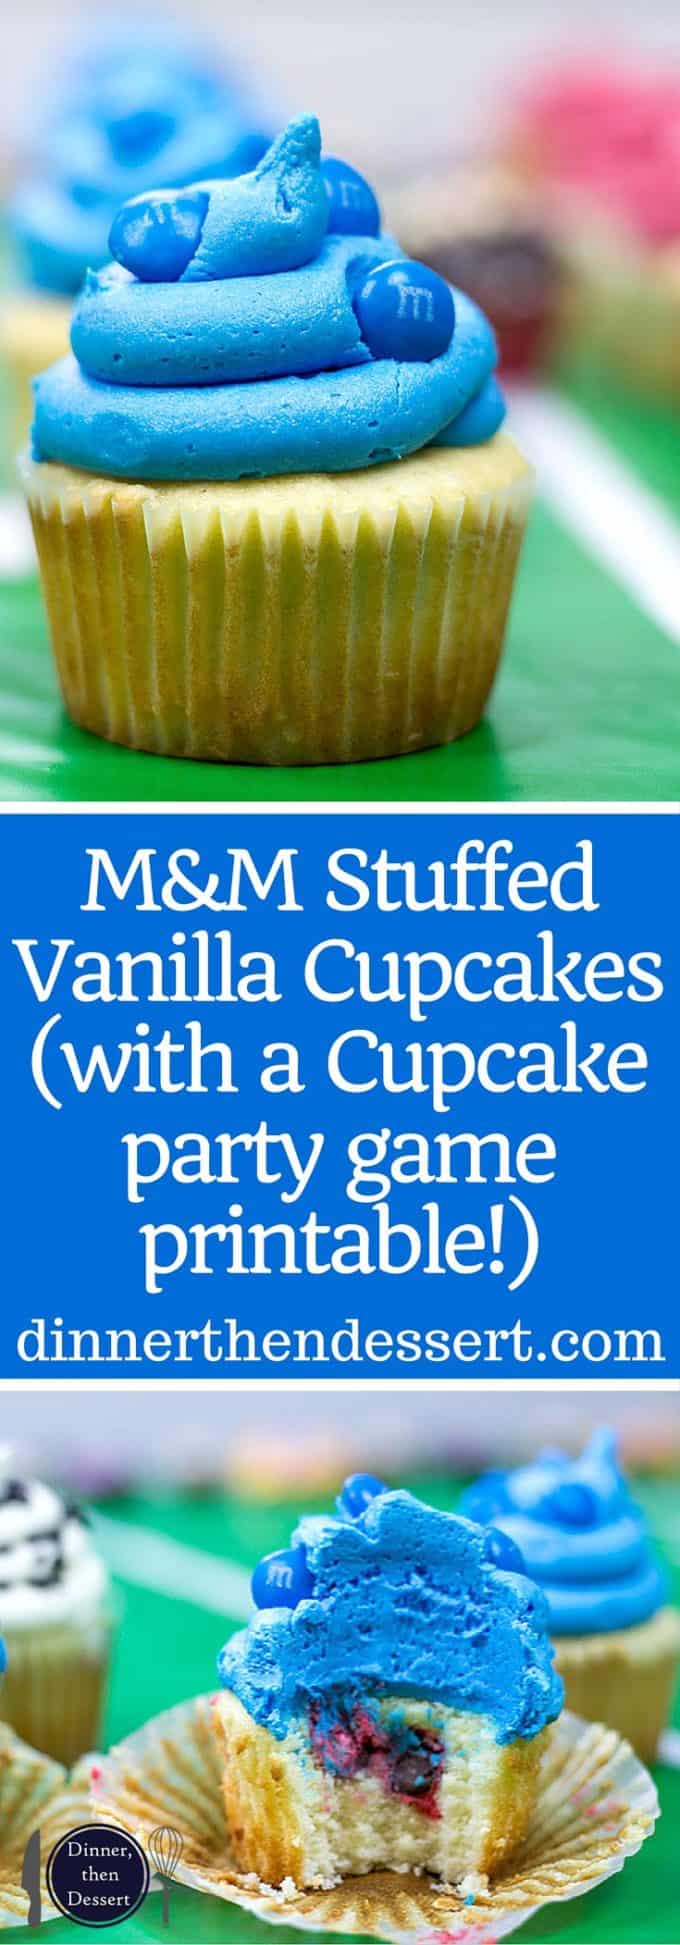 M&M's Stuffed Easy Vanilla Cupcakes with Vanilla Frosting and the stuffing makes for a fun party game for teams! (with a Super Bowl party game printable!)